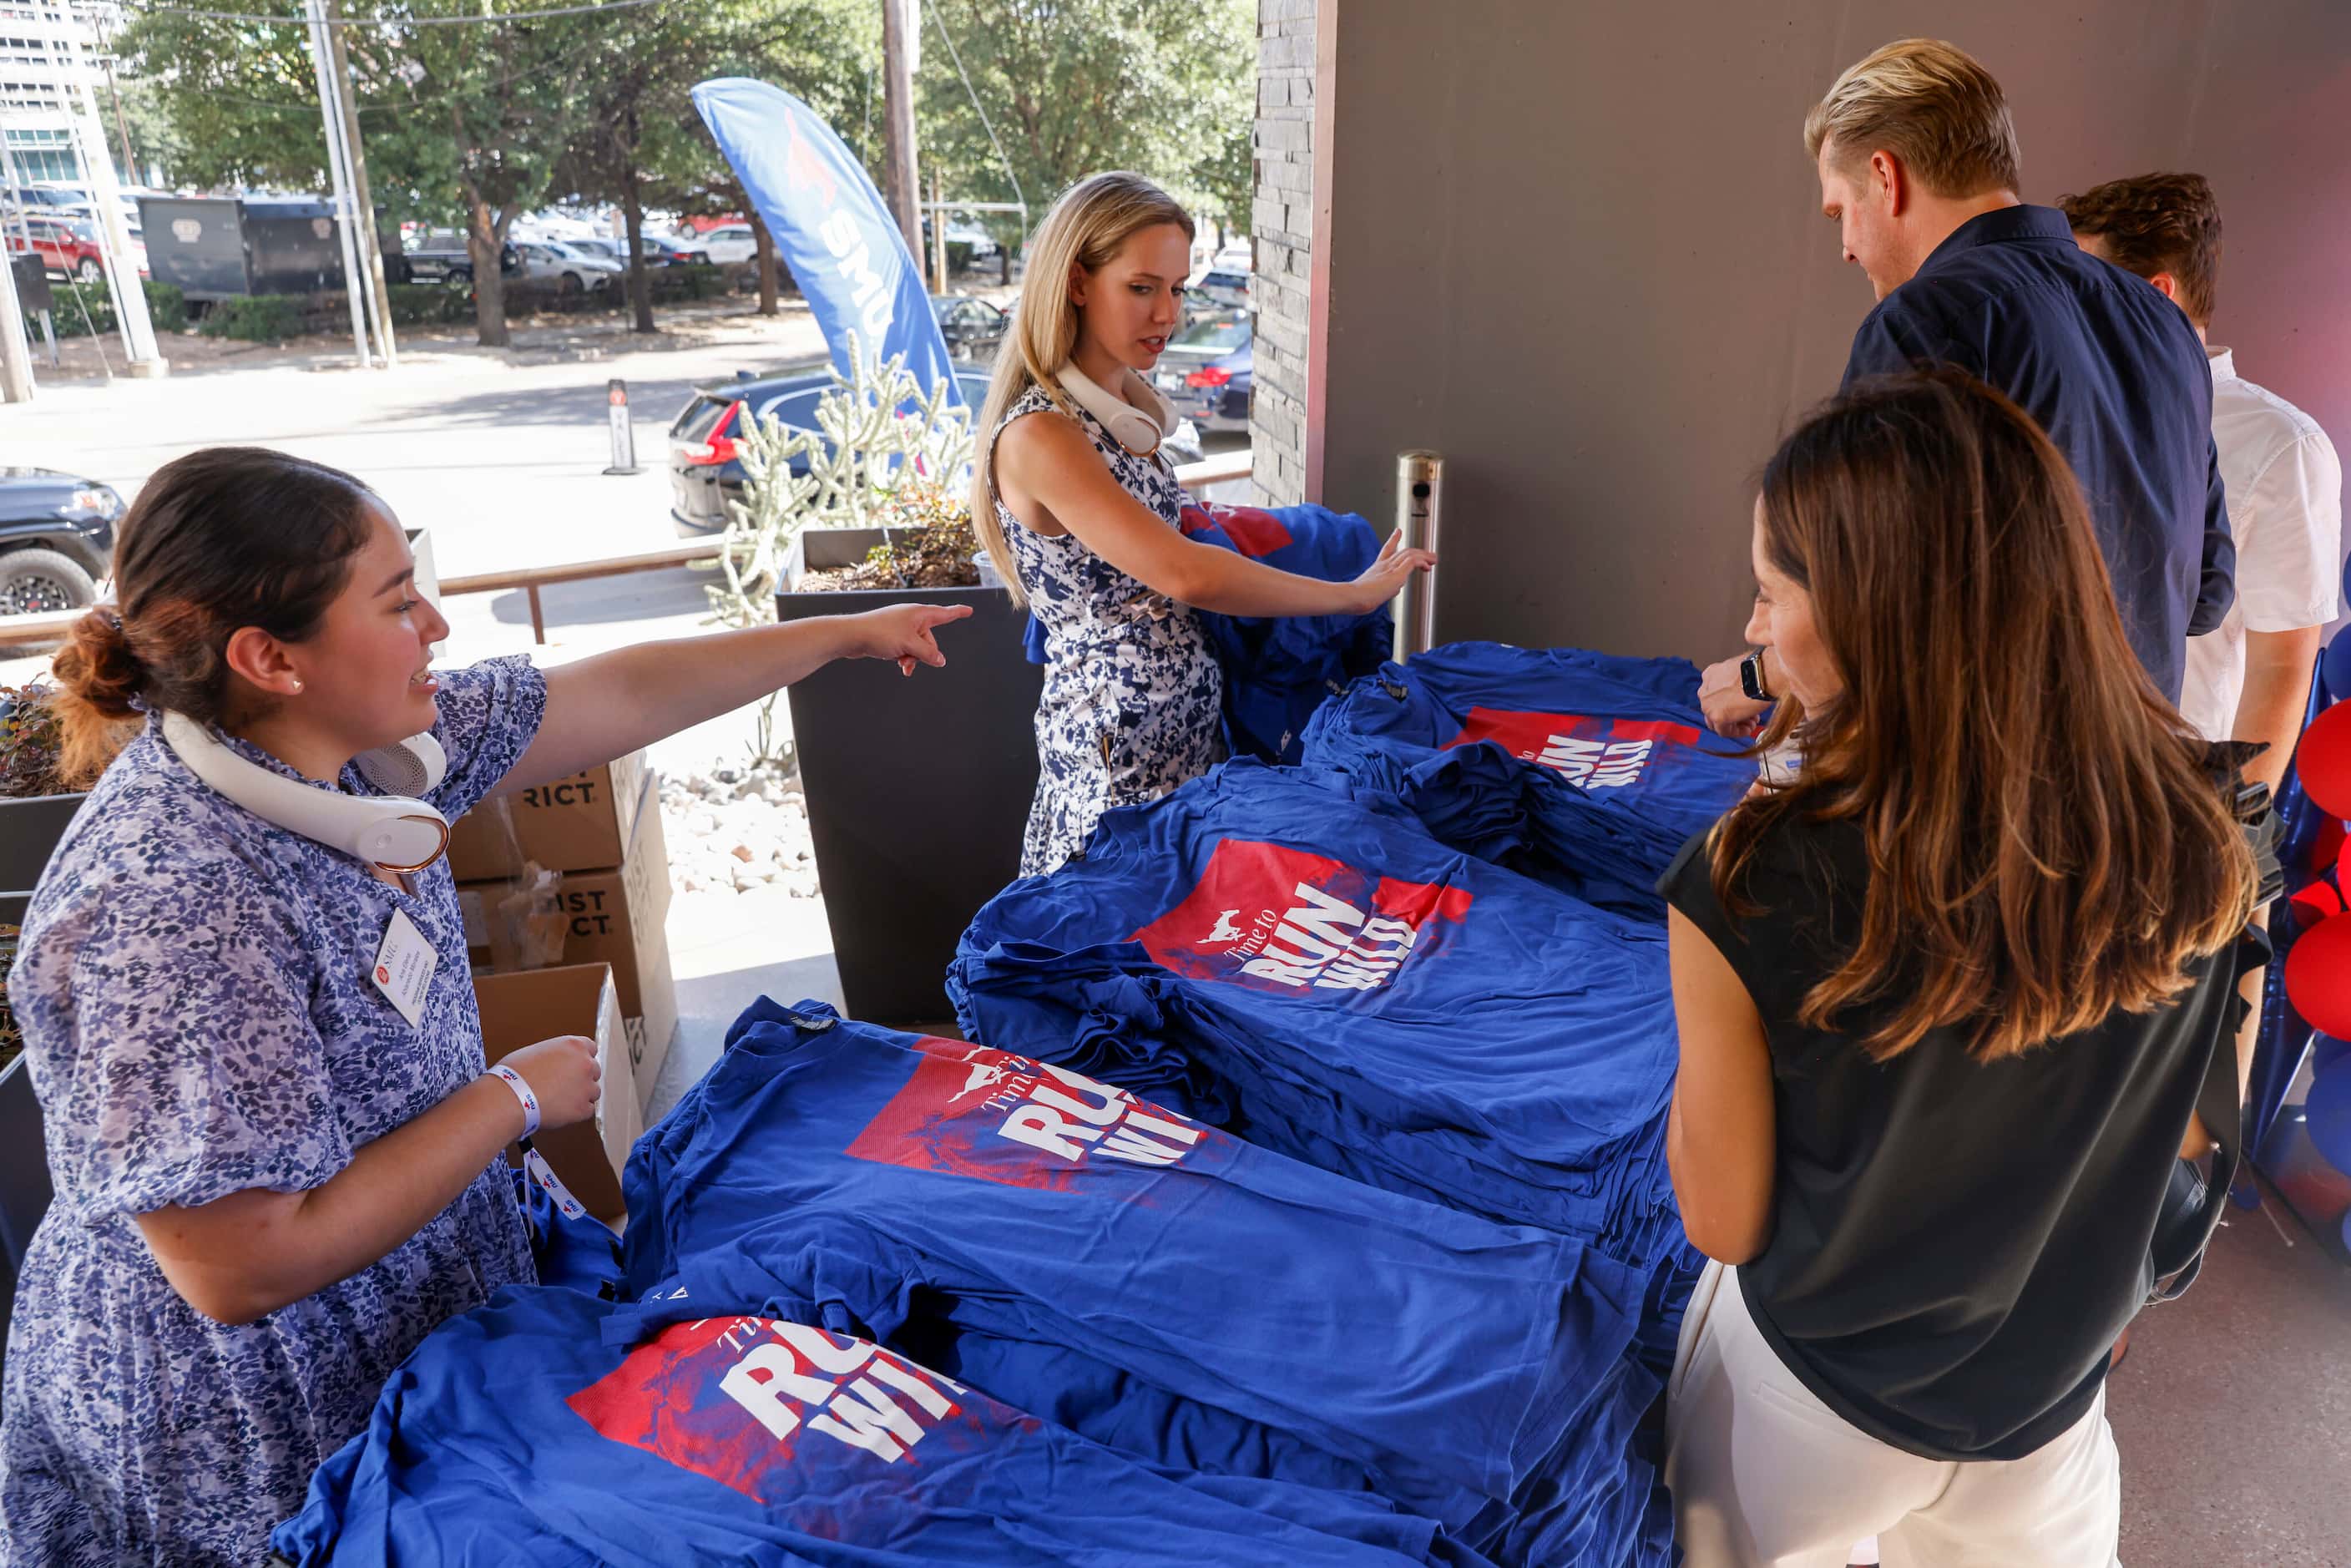 People pick up SMU shirts during a celebration of SMU’s first day in the ACC at Happiest...